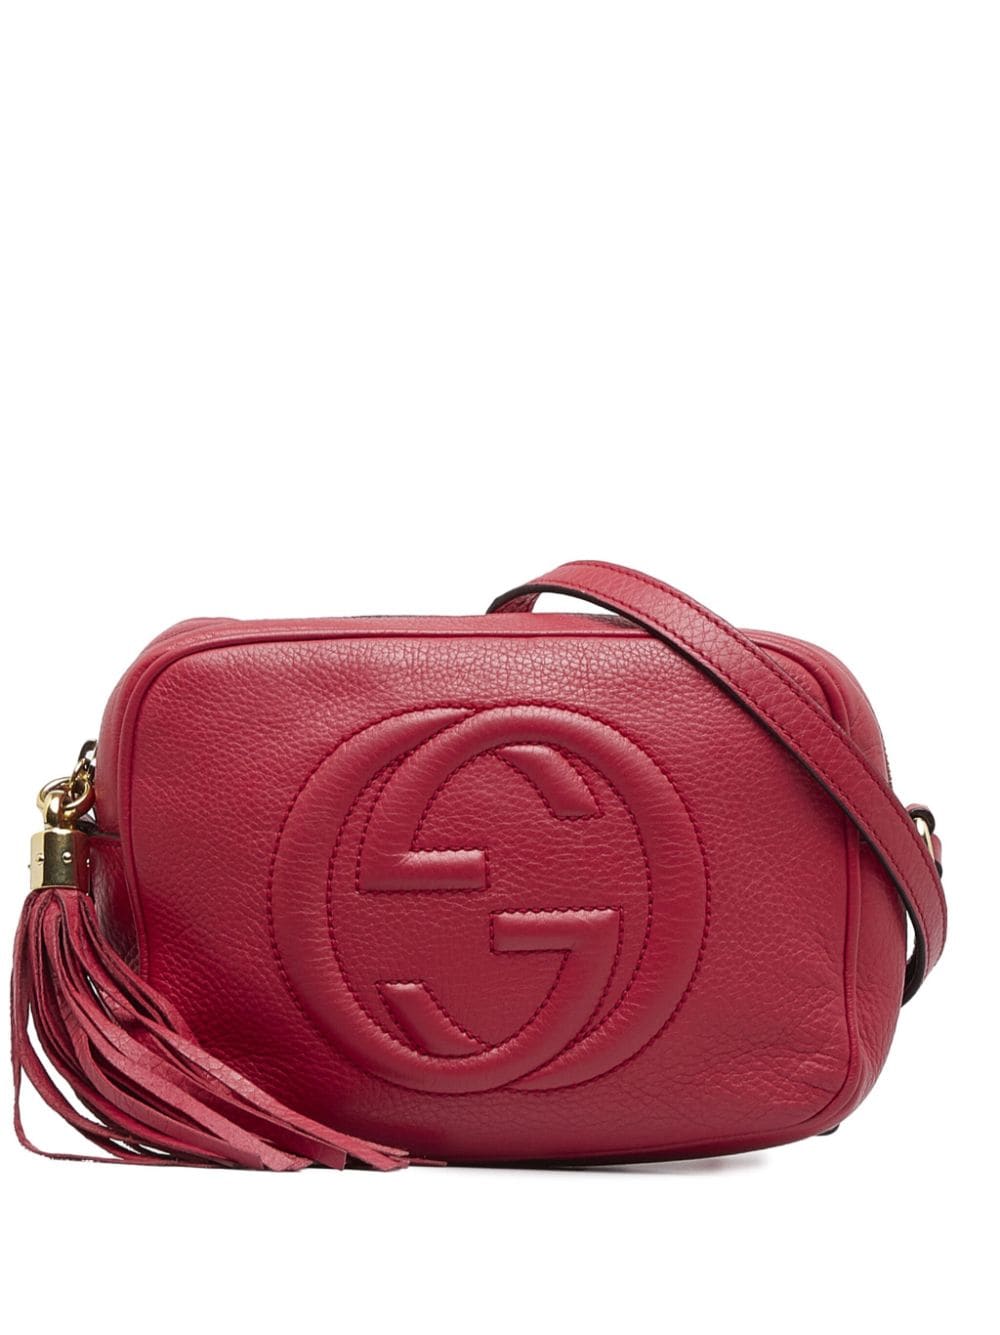 Gucci Pre-Owned 2000-2015 Pre-Owned Gucci Soho Disco crossbody bag - Red von Gucci Pre-Owned